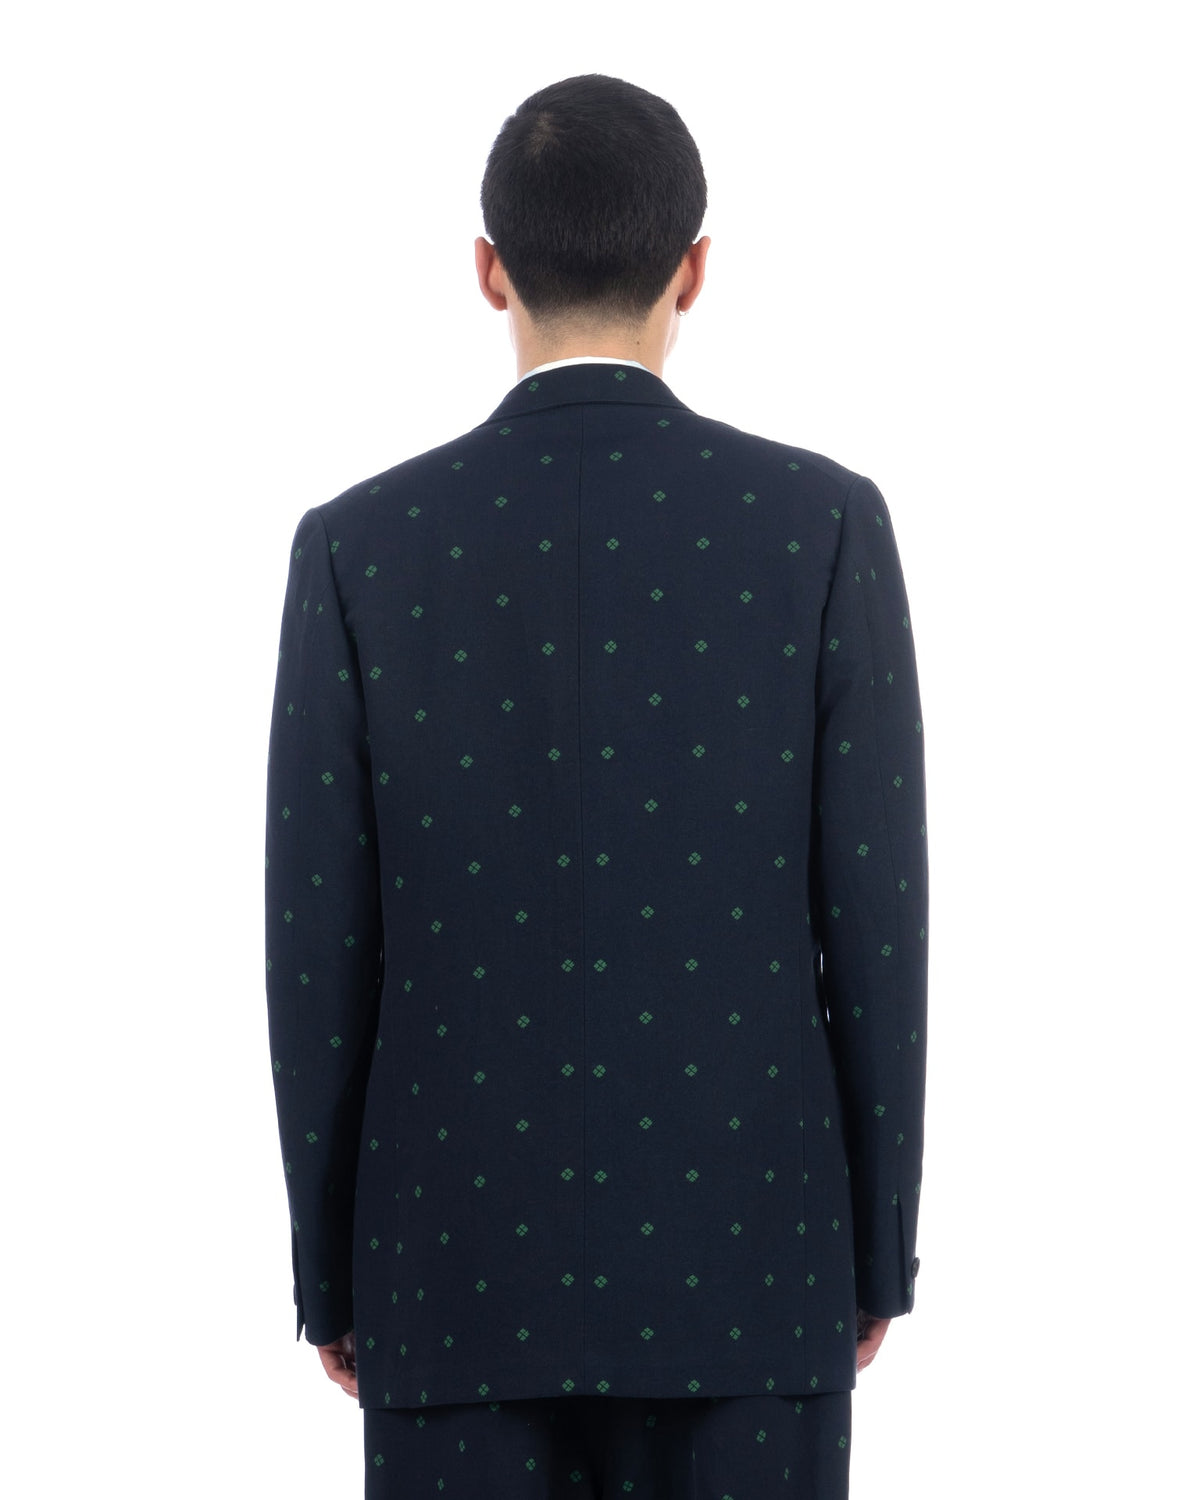 Haversack | Clover Jacquard Double Breasted Jacket Navy - Concrete